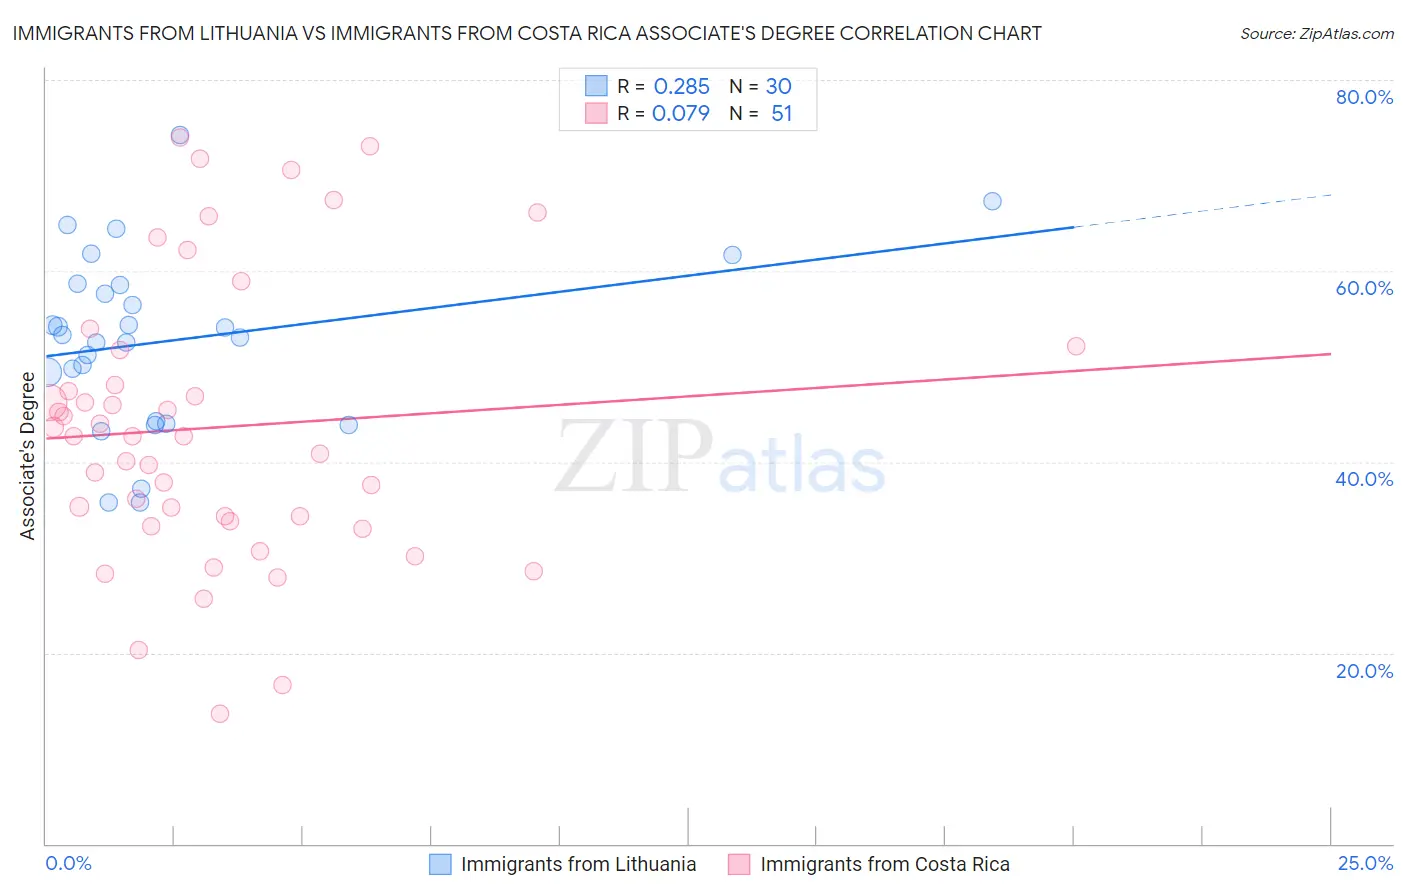 Immigrants from Lithuania vs Immigrants from Costa Rica Associate's Degree